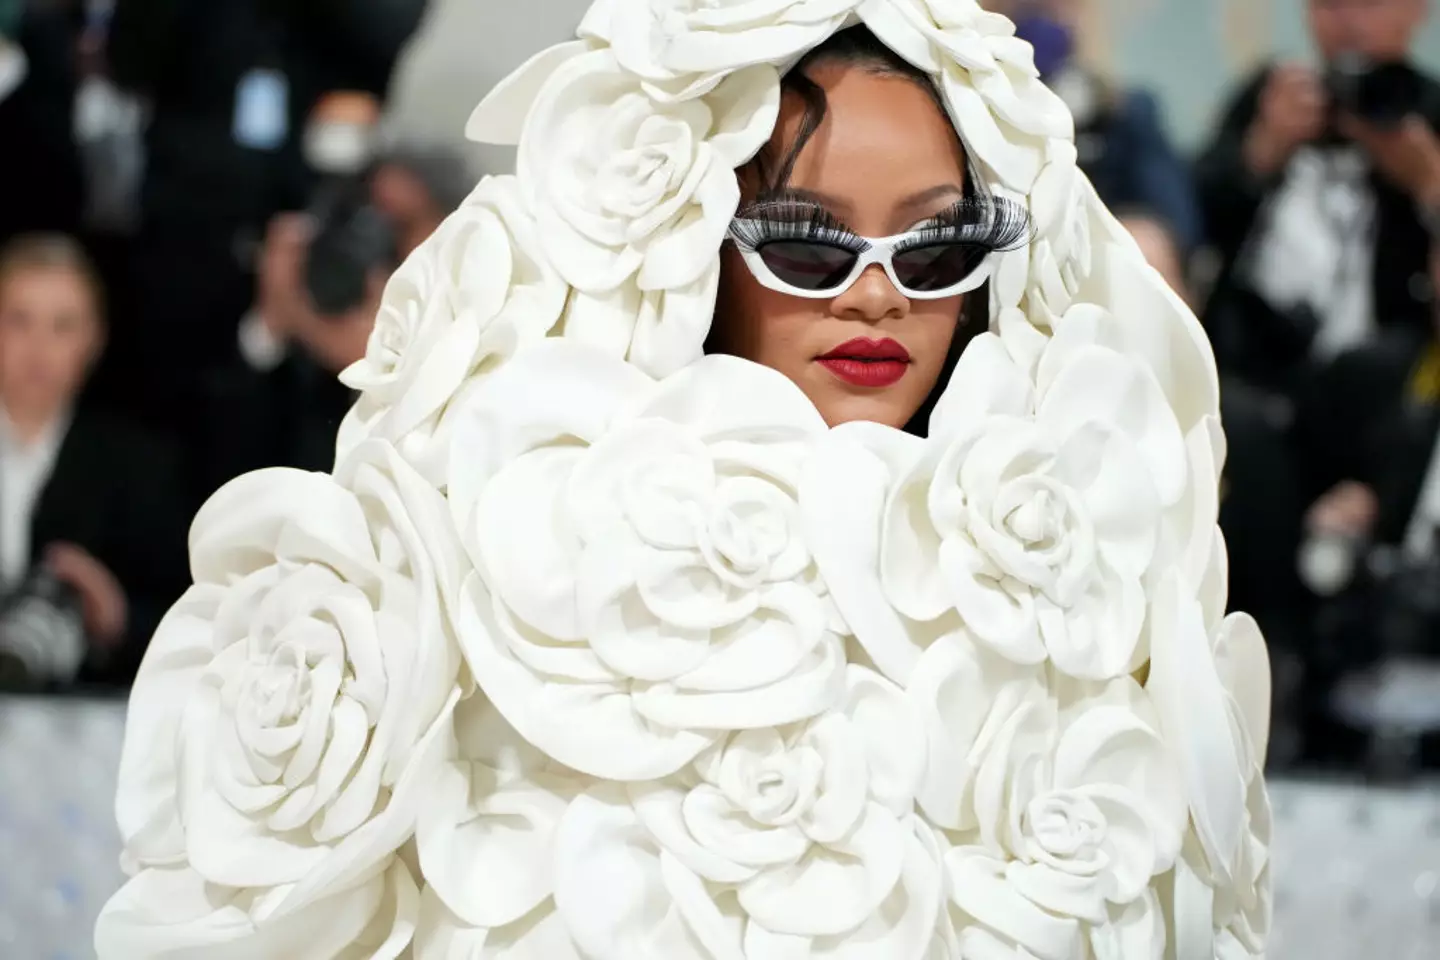 Rihanna was nowhere to be seen at this year's Met Gala. (Jeff Kravitz / Contributor / Getty Images)